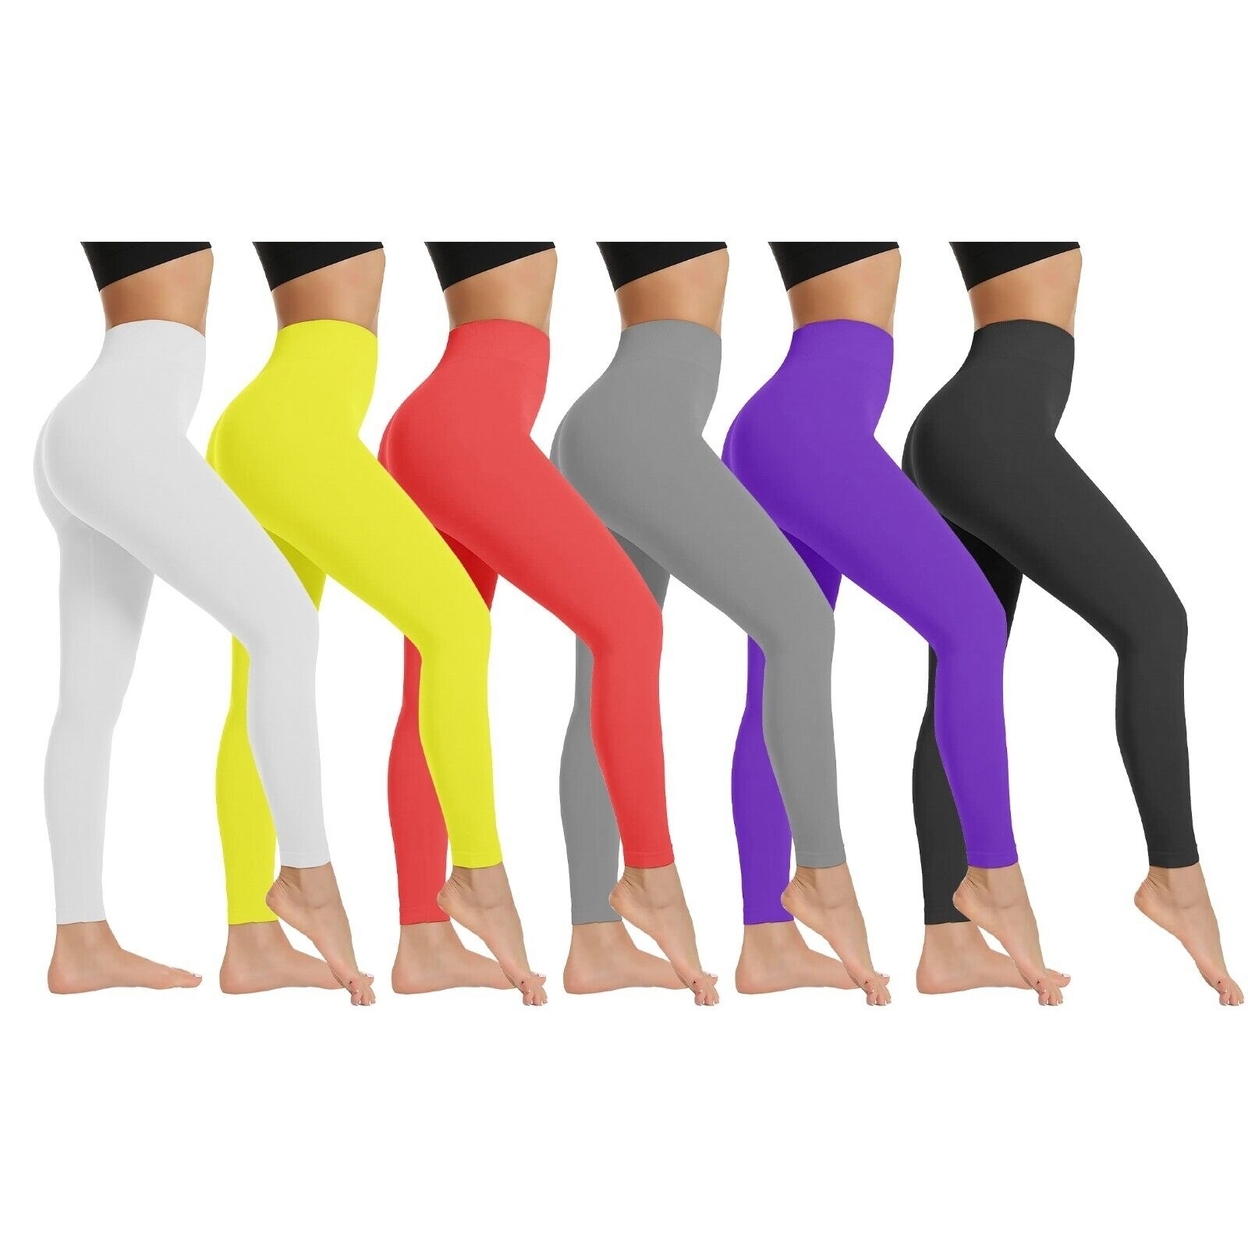 3-Pack: Women's High Waist Super Soft Active Athlete Stretch Yoga Cozy Leggings - Red,red,red, X-small